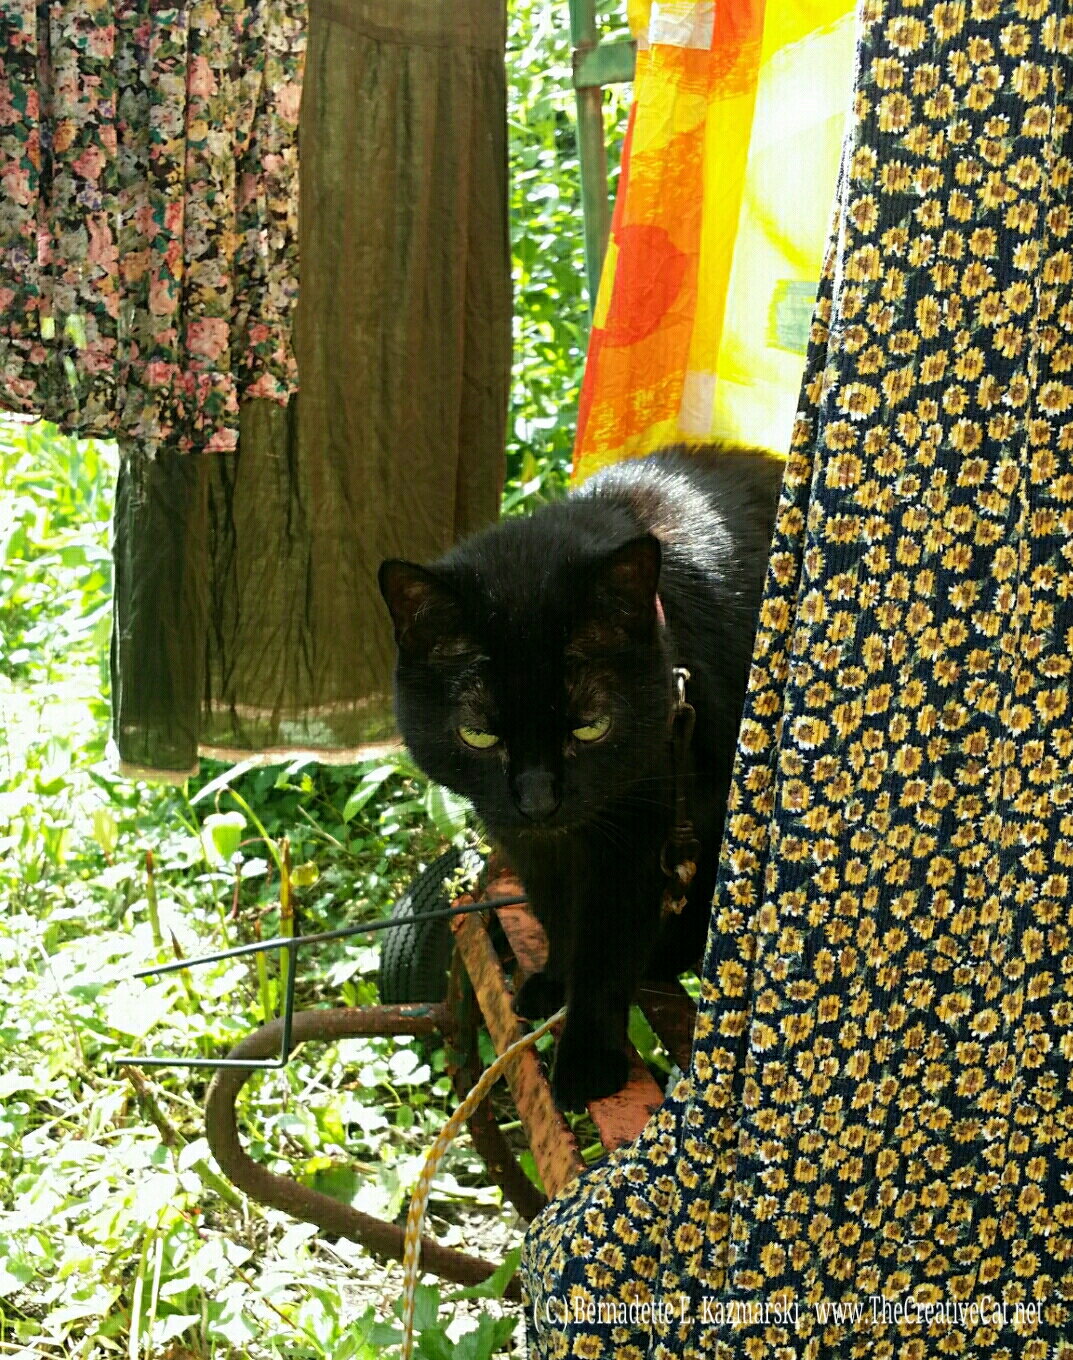 Mimi enjoys cool shade between my dresses hanging on the line.